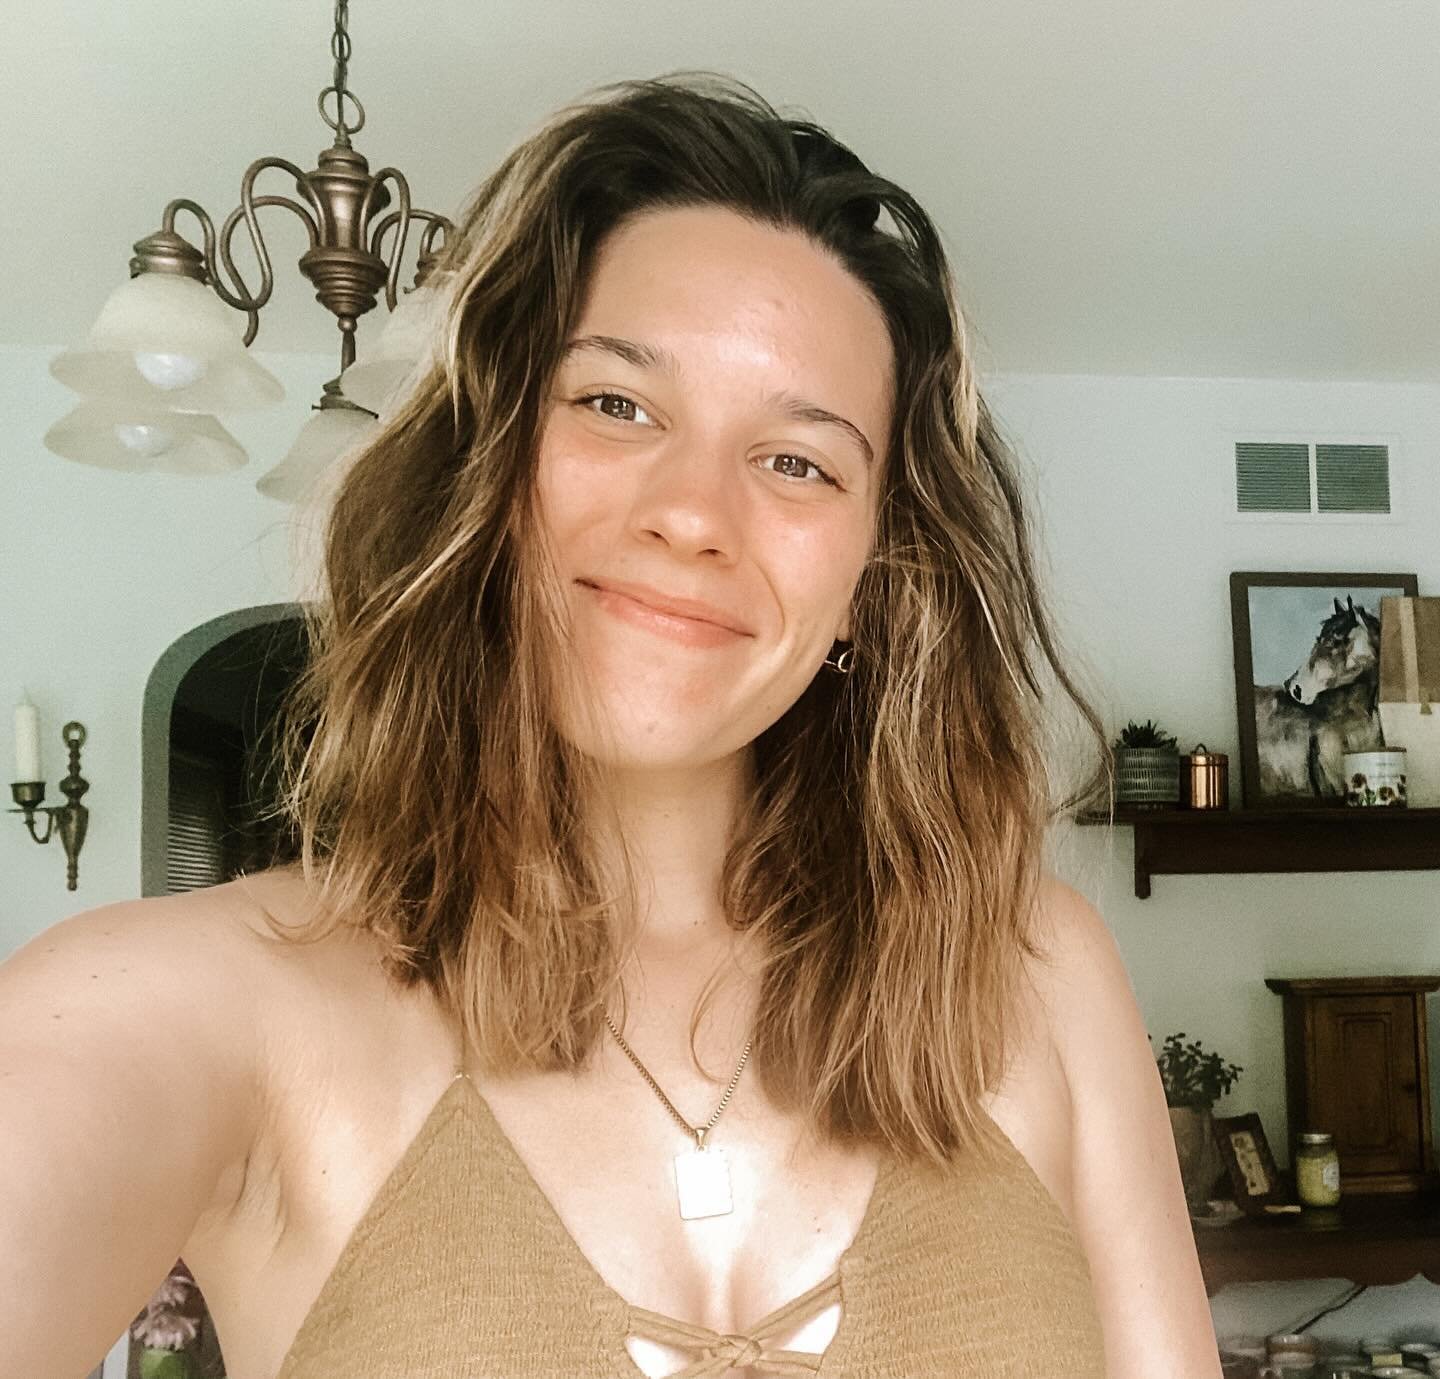 Welcoming a brand new teacher to our community 🦋🌷💕

Natalie just graduated from The Space Holder Teachers traning, passed her feedbacks and is ready to teach! She radiates kindness, compassion, and play. 🤸 

When you see her around say hello! 👋?